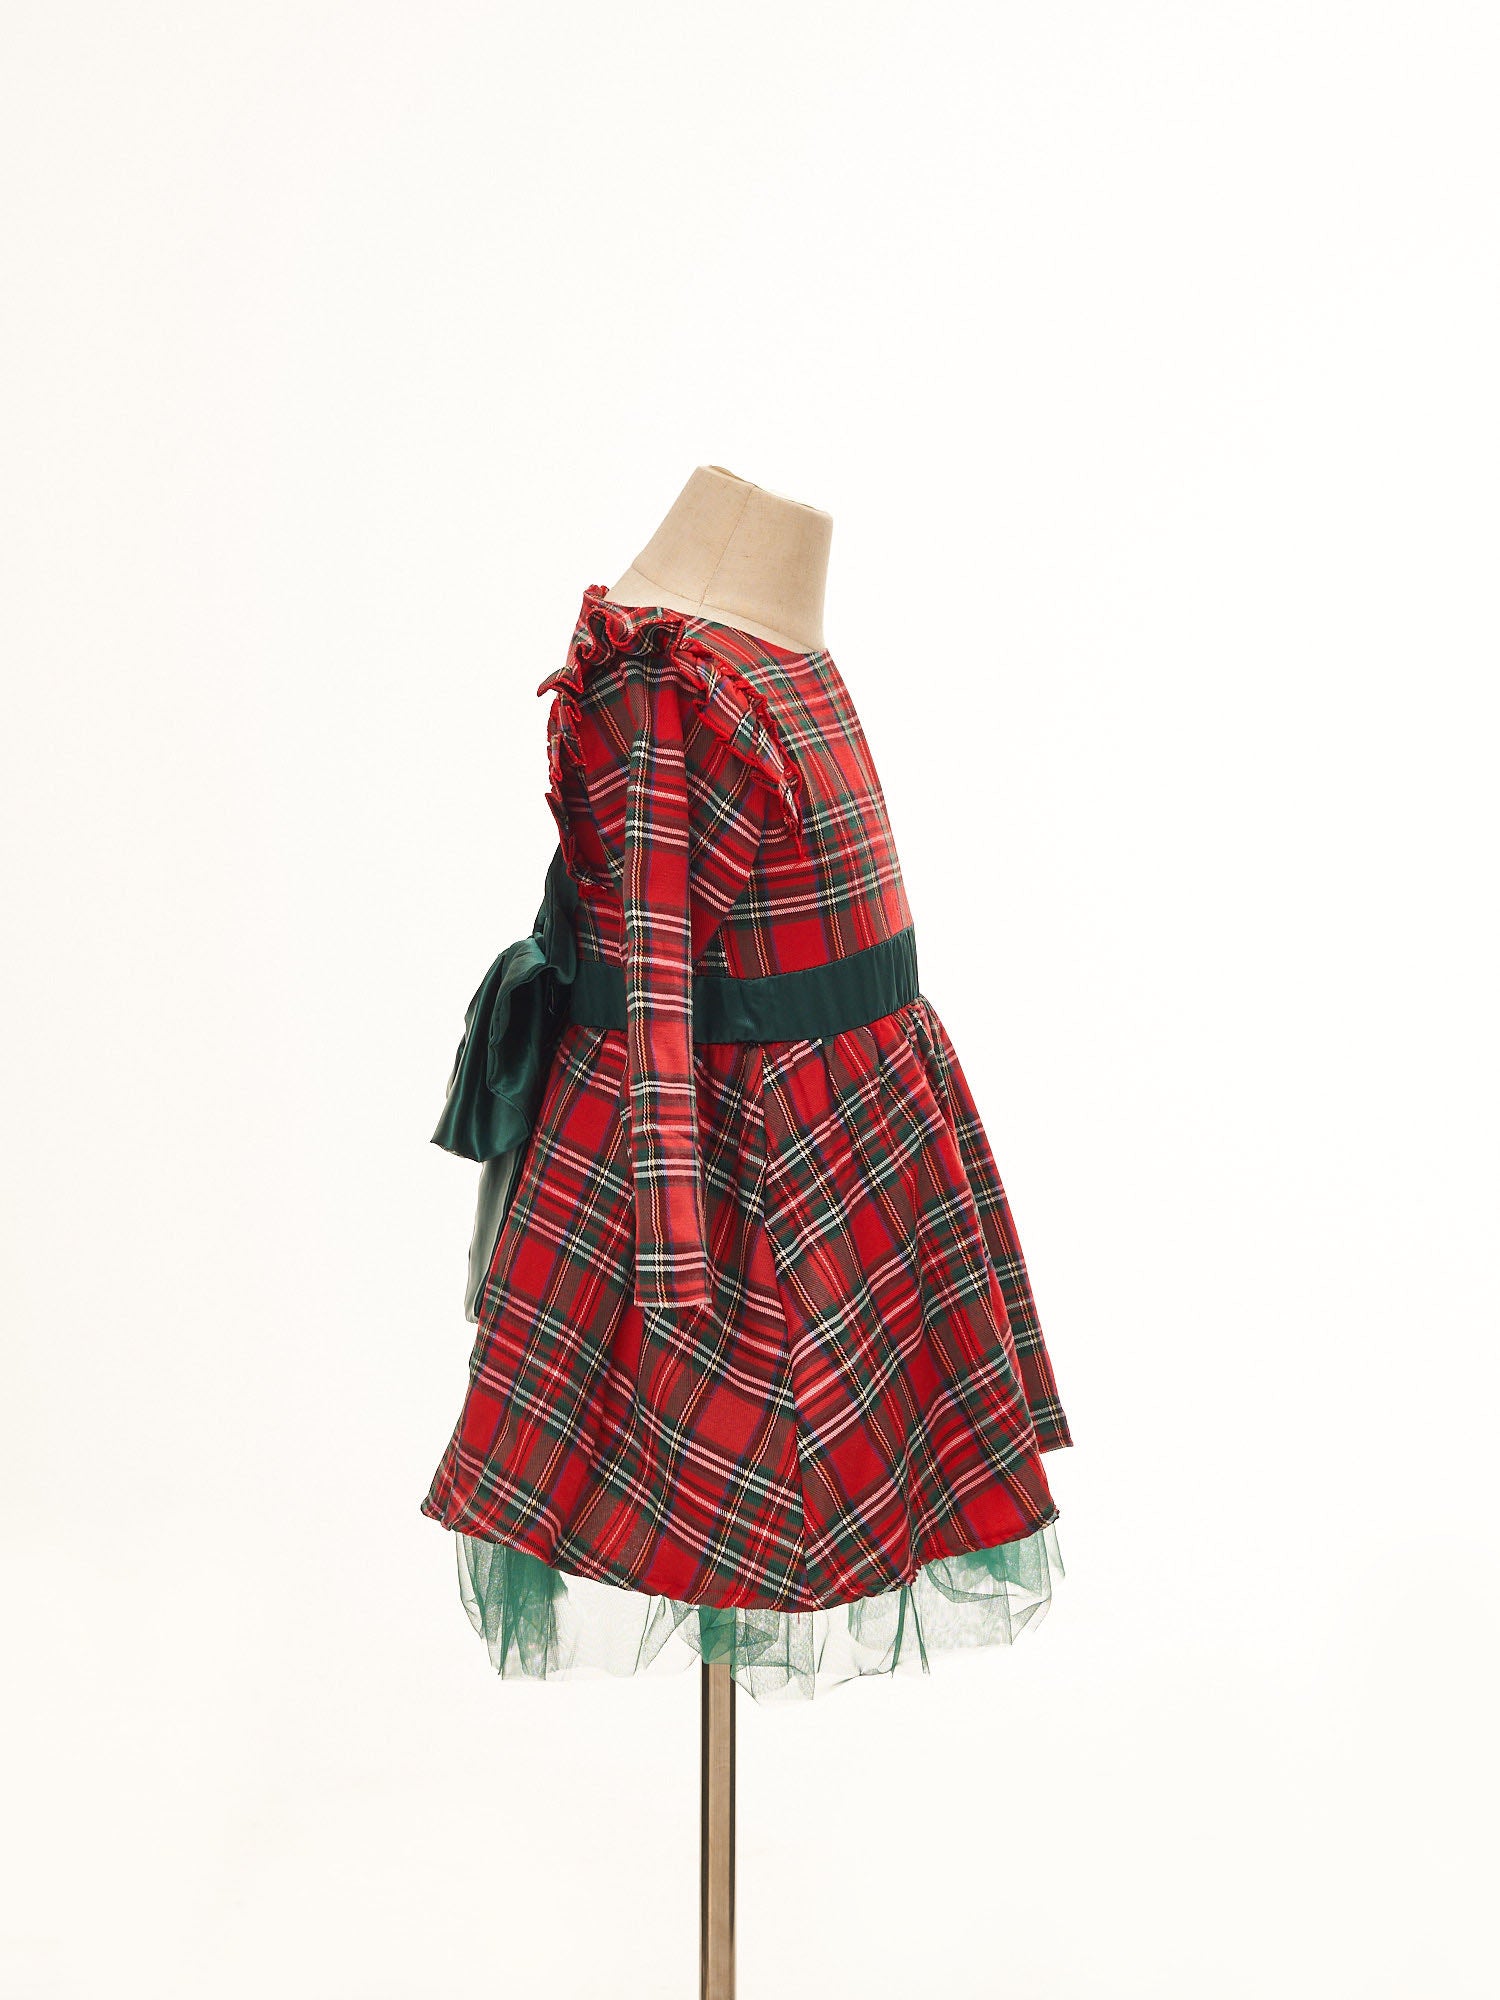 Kate Green Red Plaid Bow Tie Princess Kids Dress for Photography